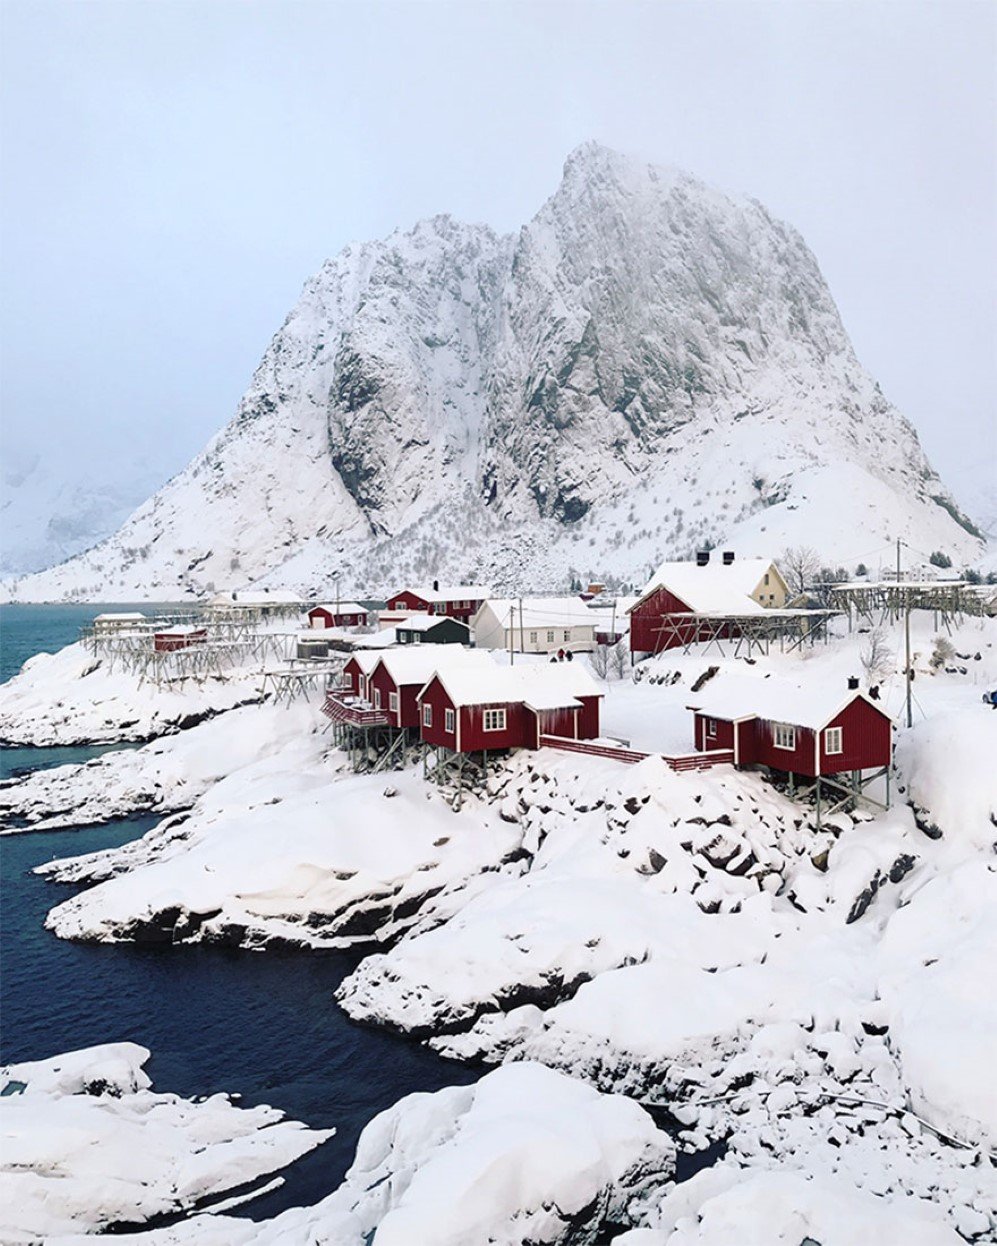 I shot this image on a bridge in Norway’s Lofoten Islands overlooking Reinefjord towards Olstinden. The red cabins are traditional fishing cottages. I try to push myself outside of my comfort zone photographically a few times a year, and this year I headed to the arctic in February. I took this shot just after sunrise during a snowstorm. The colors changed every few minutes, and the snowfall was heavy at times changing the moody dramatically from minute to minute.  It was a classic “wait for the light” situation. It was amazingly atmospheric and beautiful, but very cold and windy. I shot this image using the native camera app on my iPhone 7 plus. The light was beautiful and I and used a touch of the Instagram Clarendon filter, which punched up the blue in the water. I’ve always been a fan of sunsets but photographing sunrise can be just as magical.